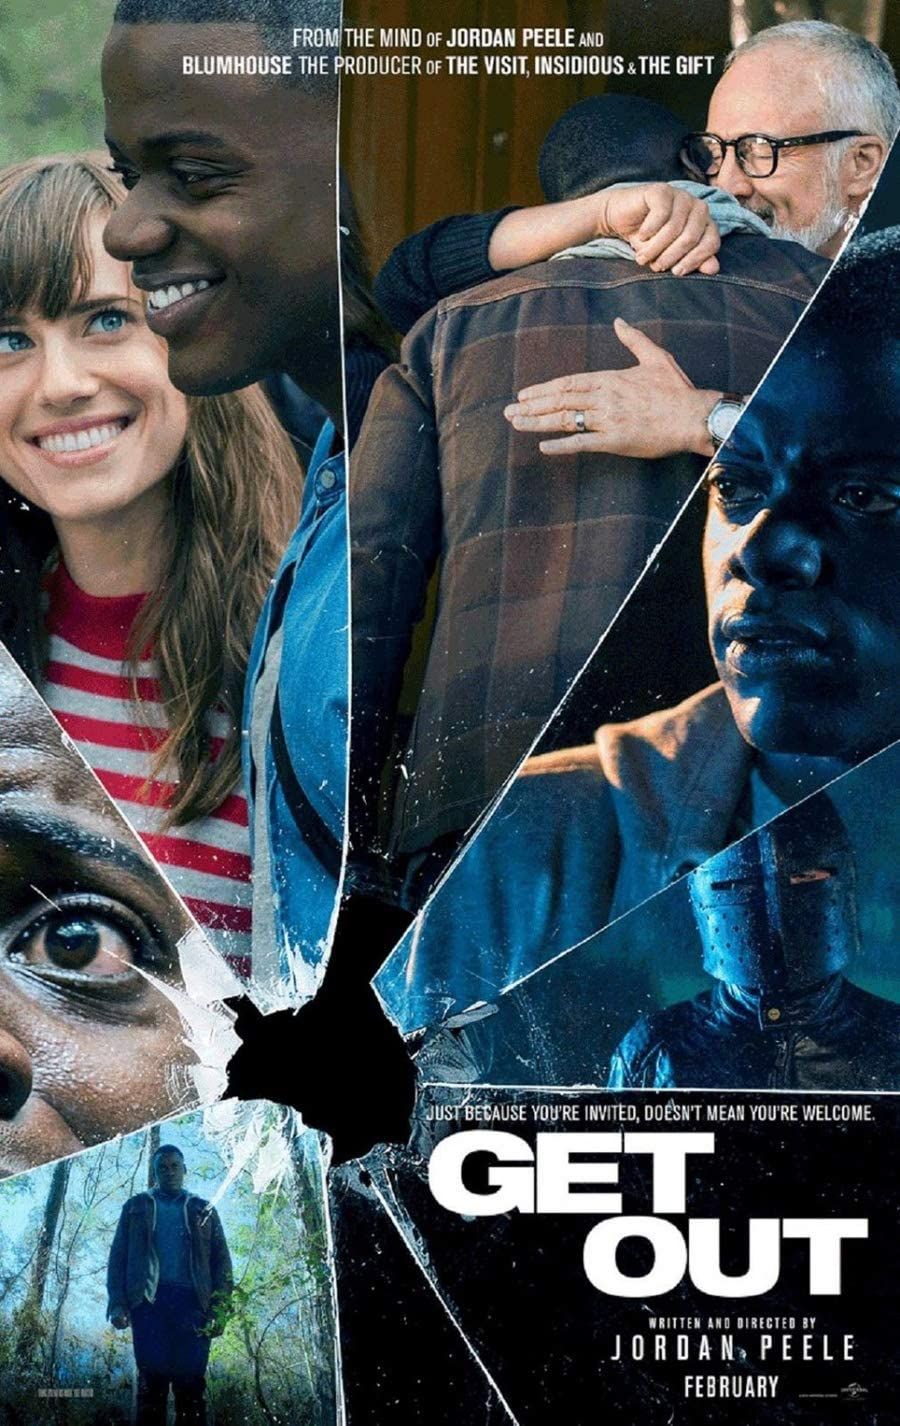 Get Out Movie Poster.jpg